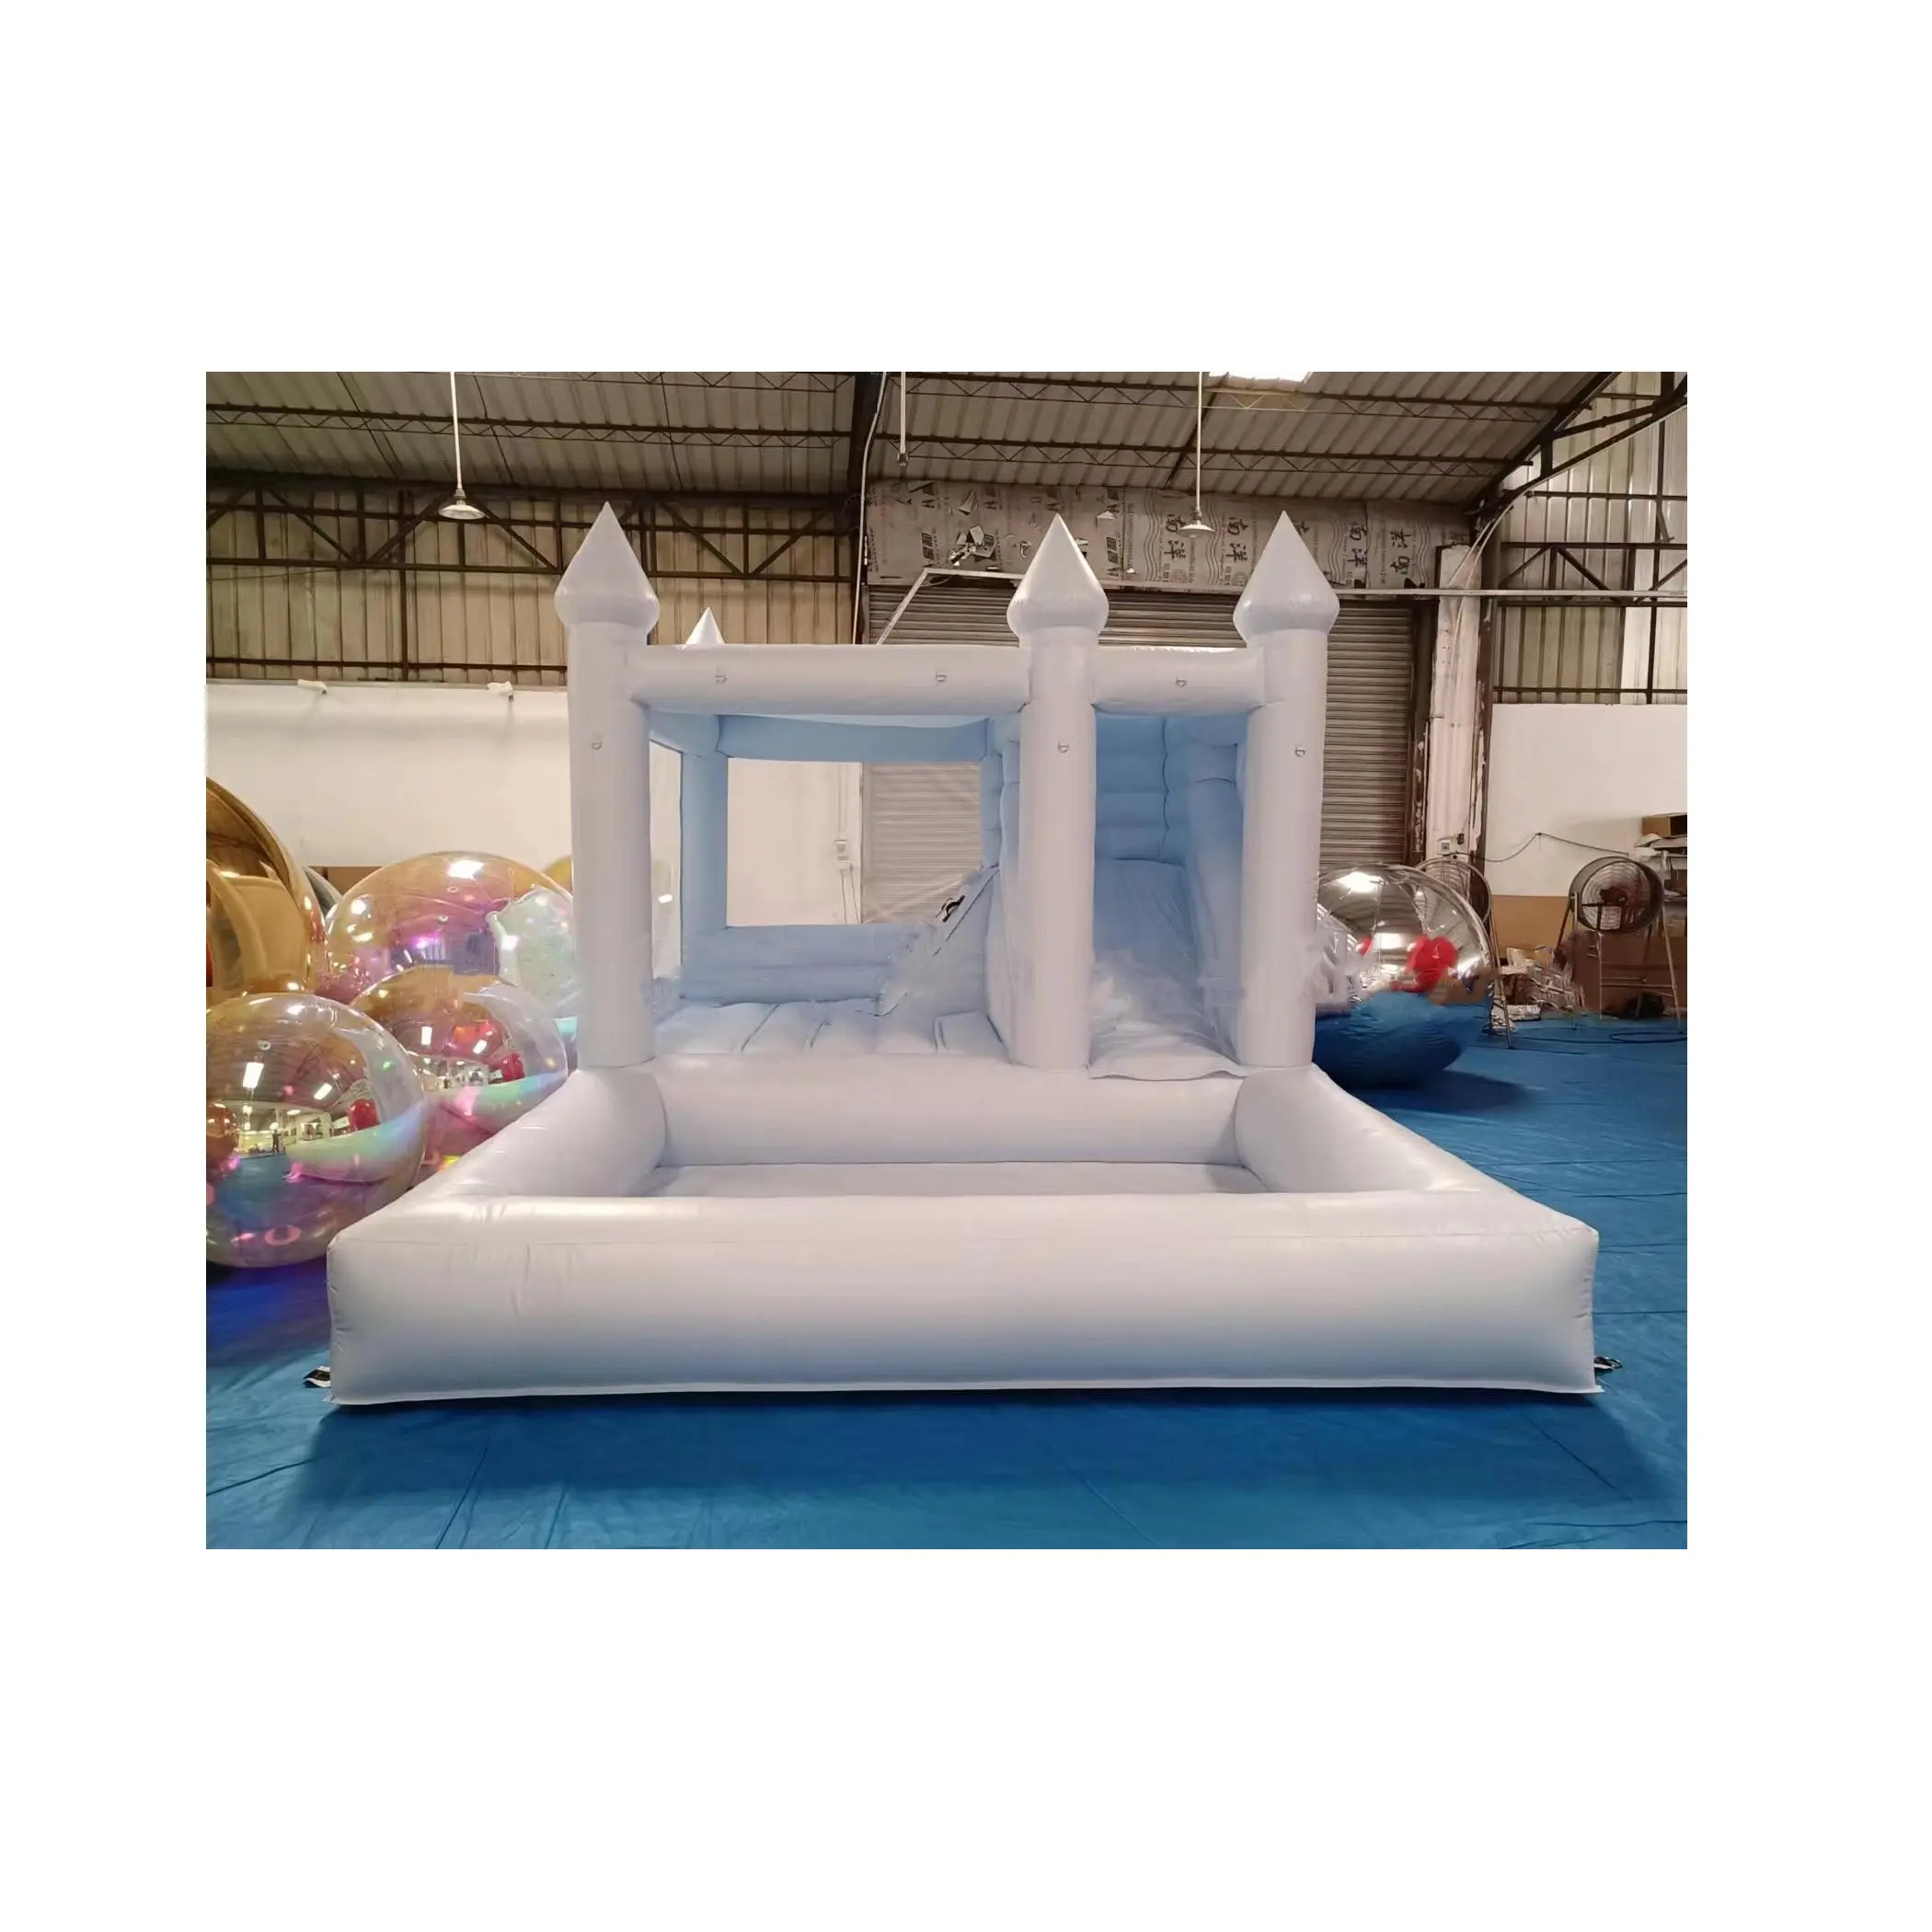 Commercial Kids Wedding Inflatable Bouncer with Slide Jumping Castle Bounce House White Bouncy Castle with Ball Pit for Party